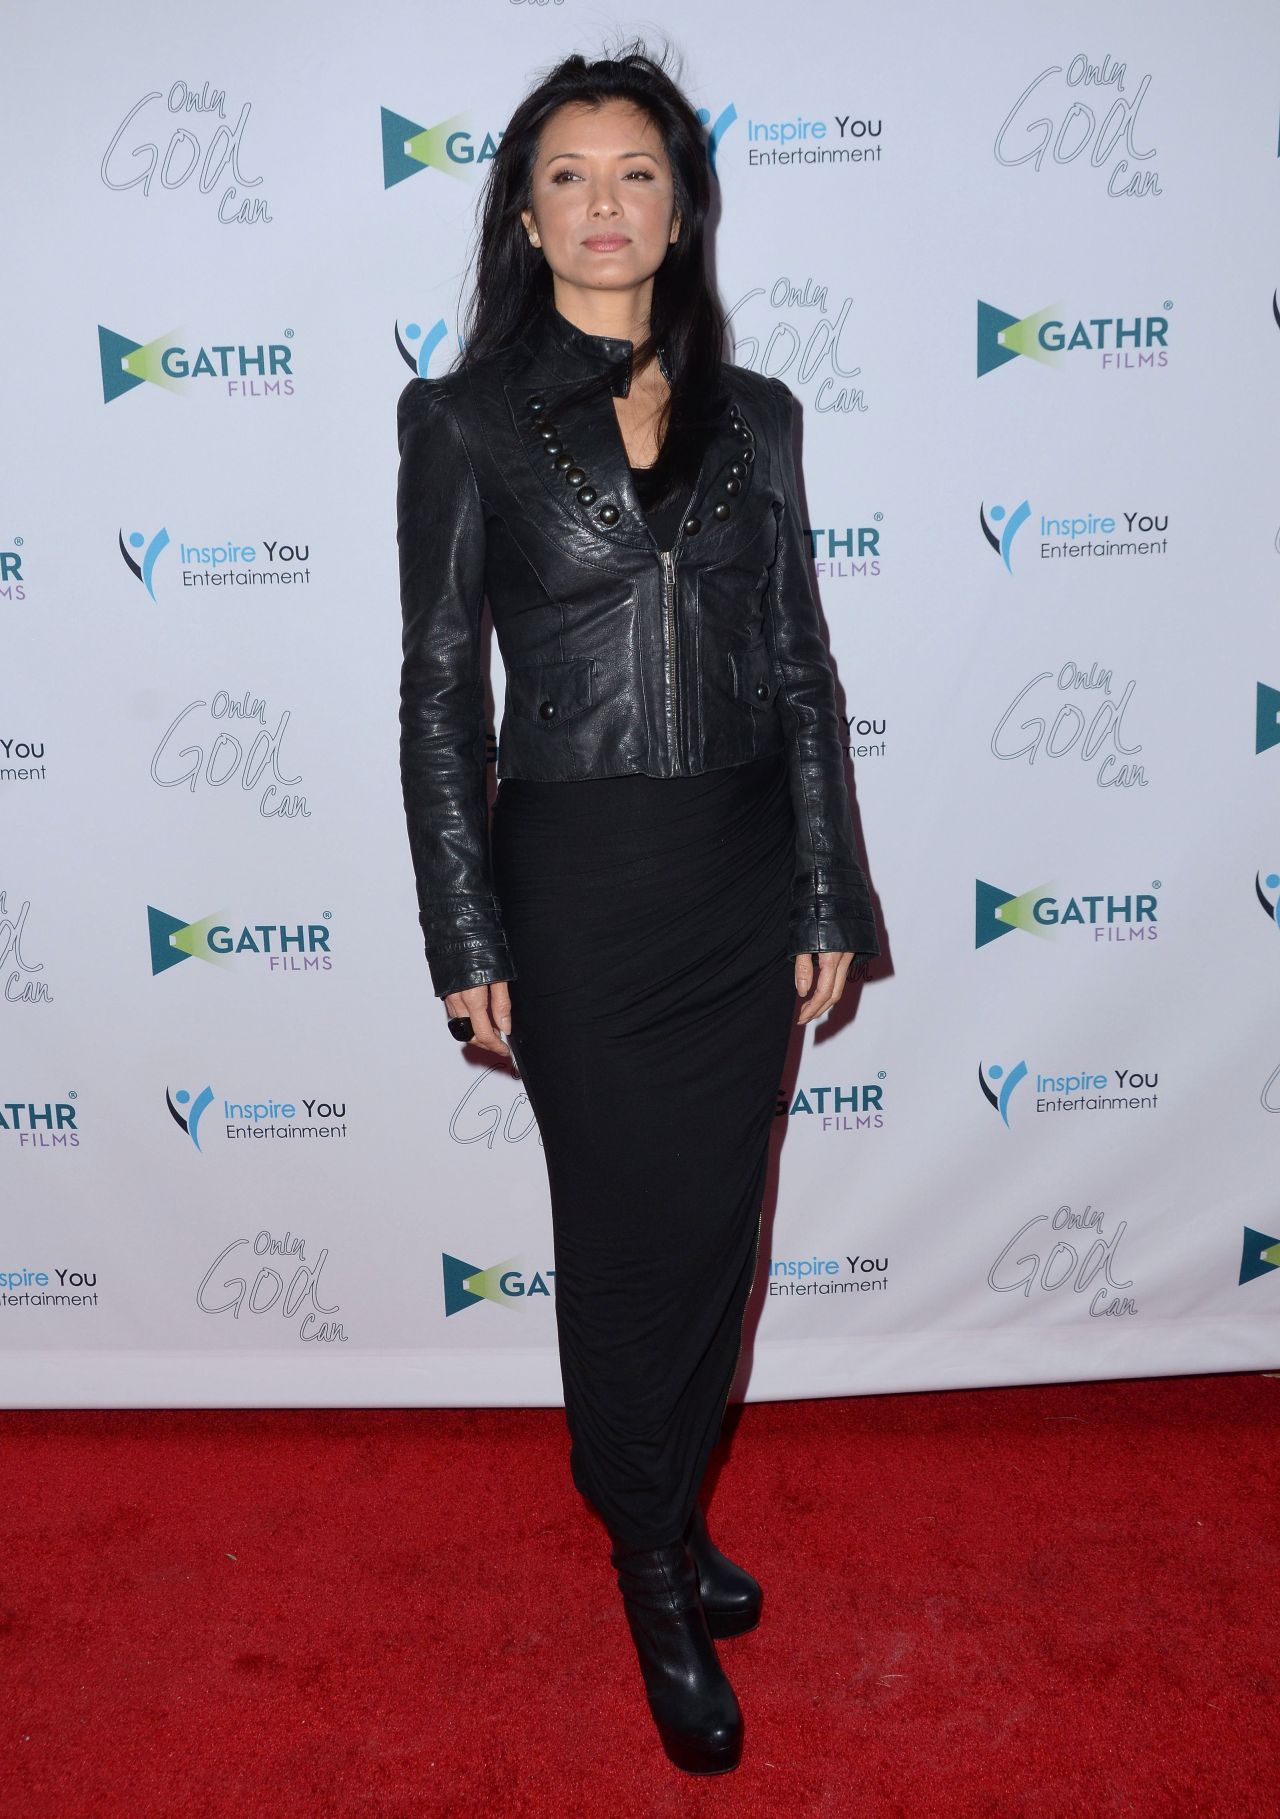 Kelly Hu – ‘Only God Can’ Premiere in Los Angeles, CA